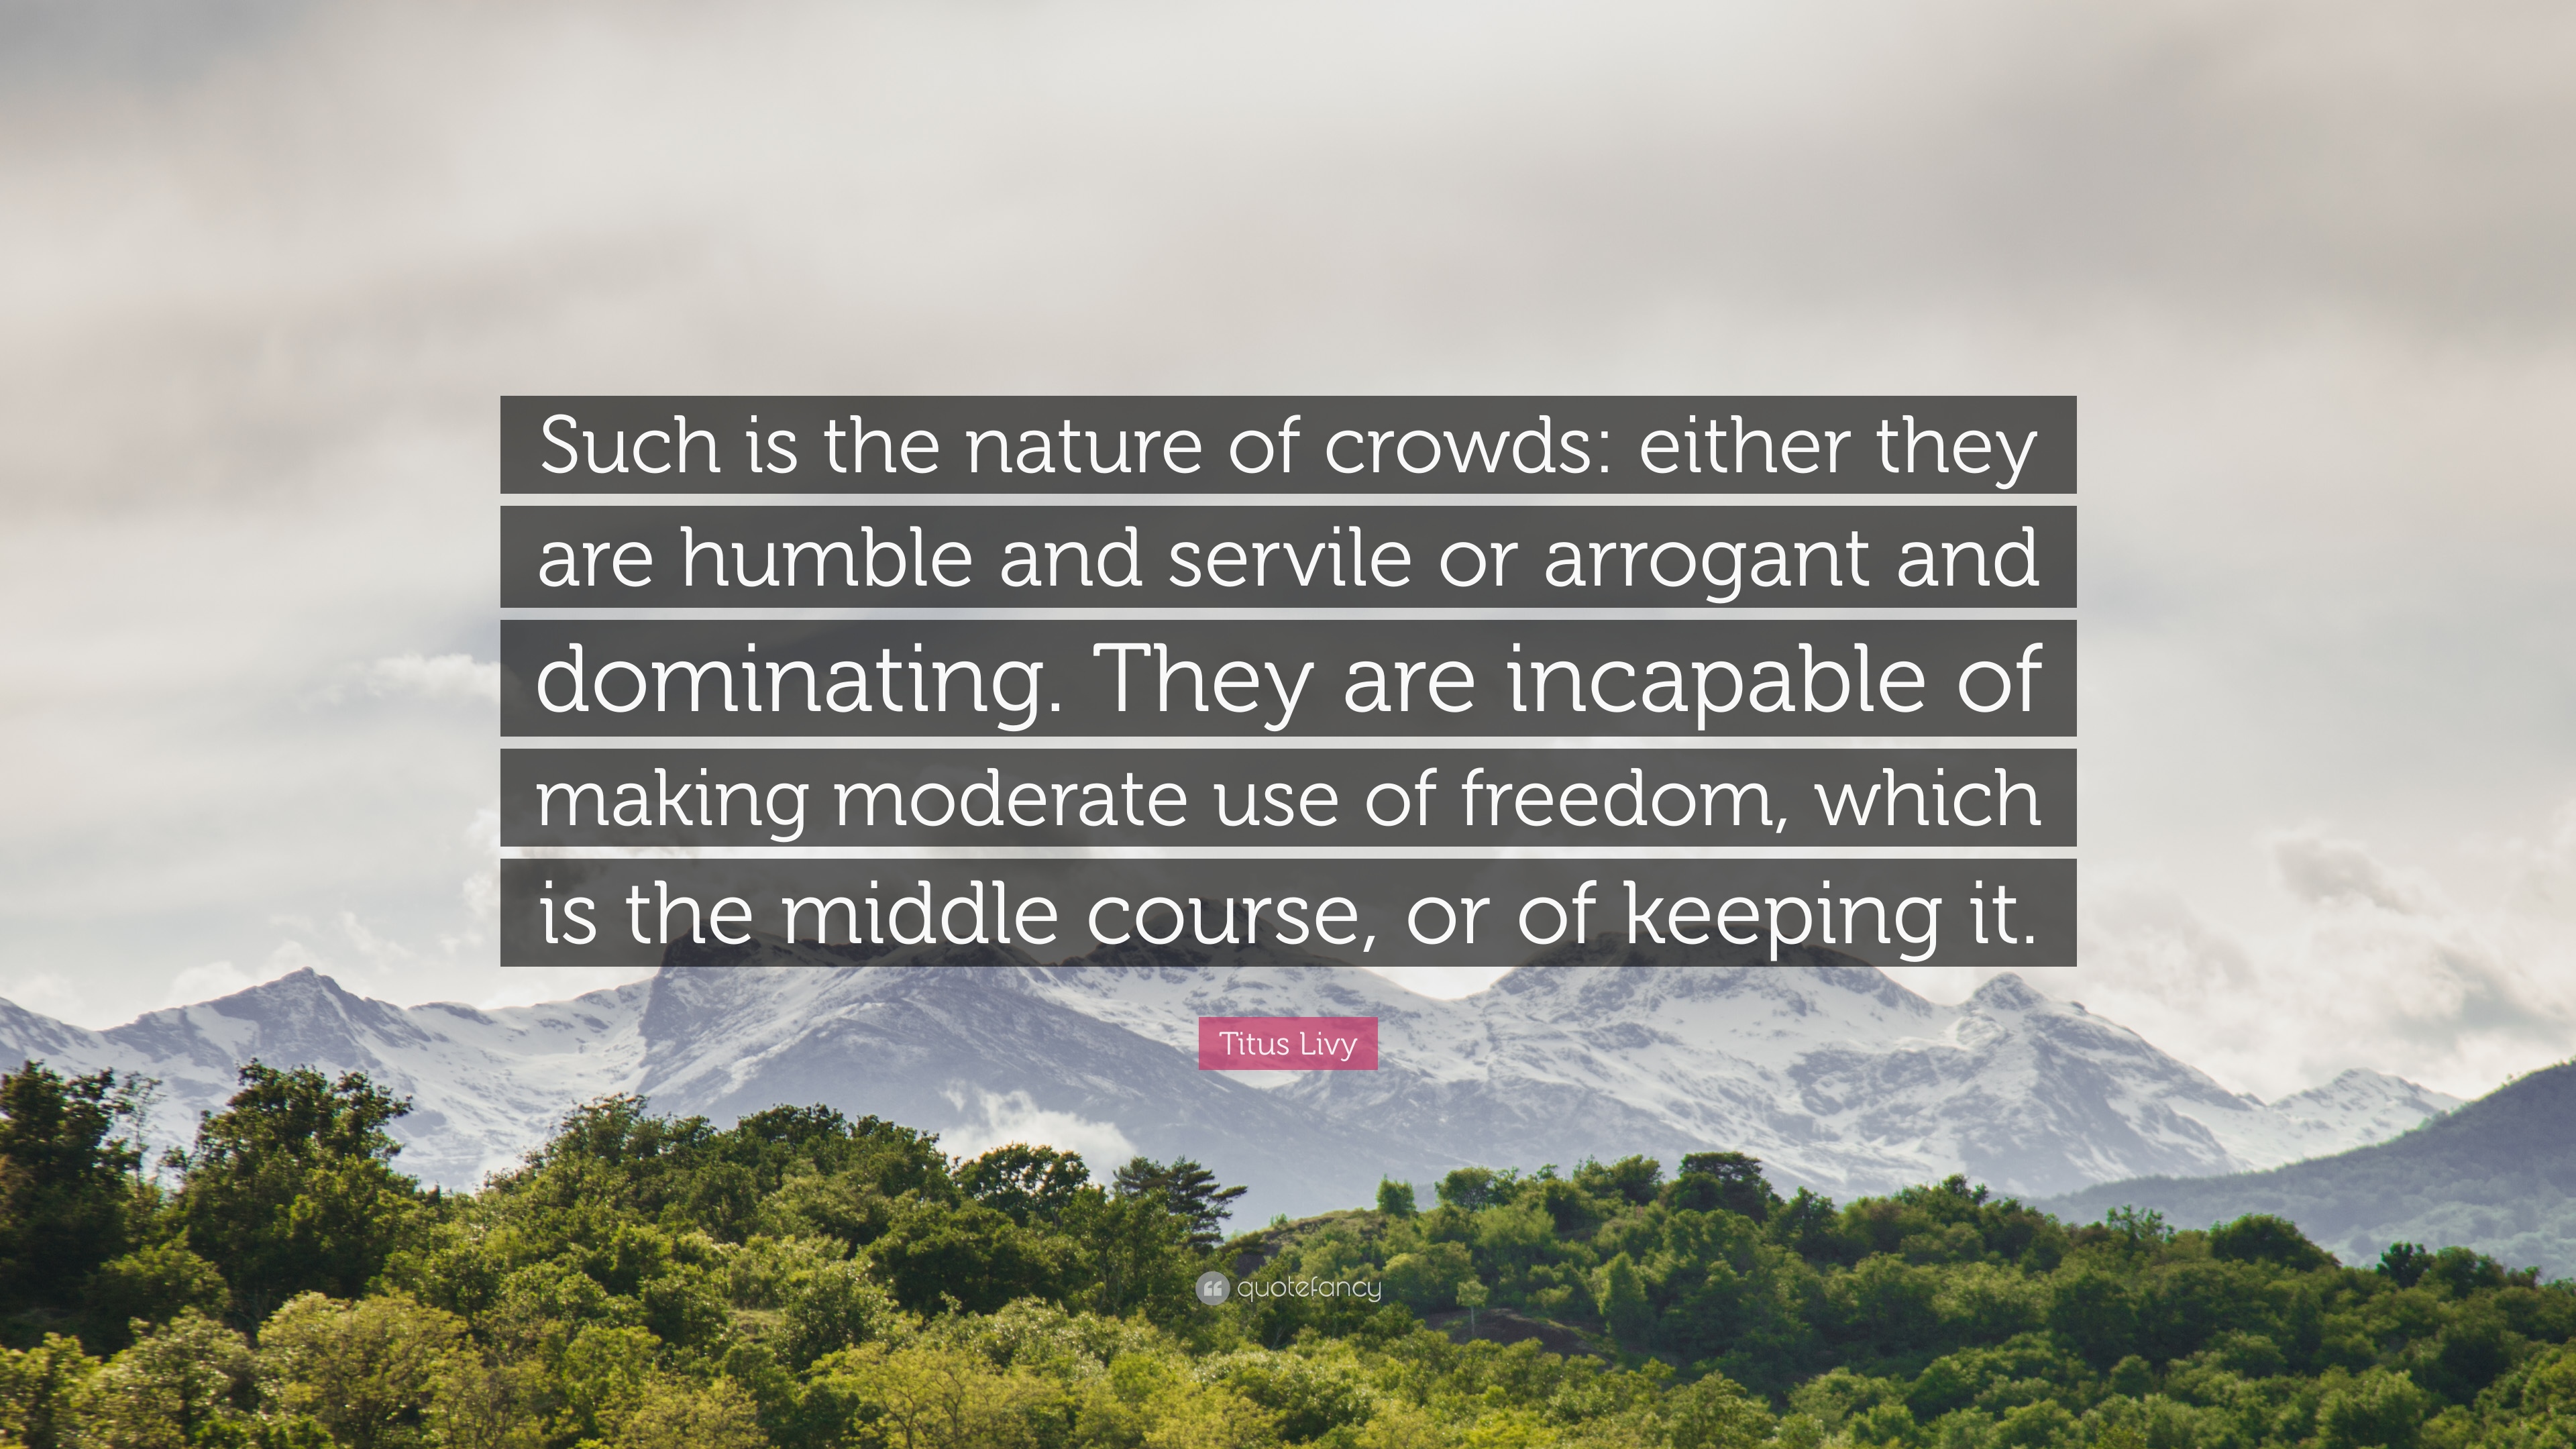 Titus Livy Quote: “Such is the nature of crowds: either they are ...